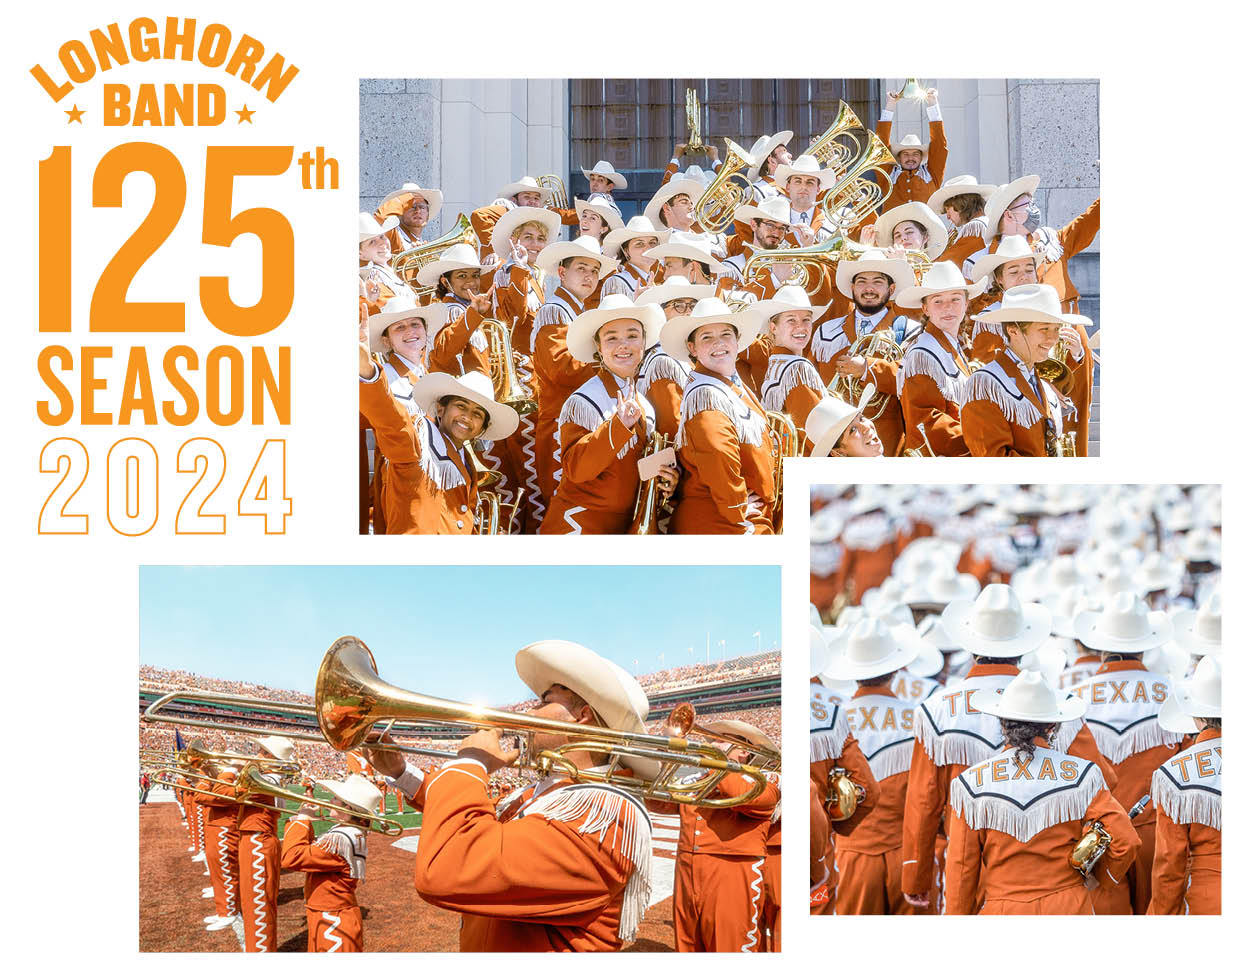 A collage of photos celebrating the 125th Season of the Longhorn Band in 2024